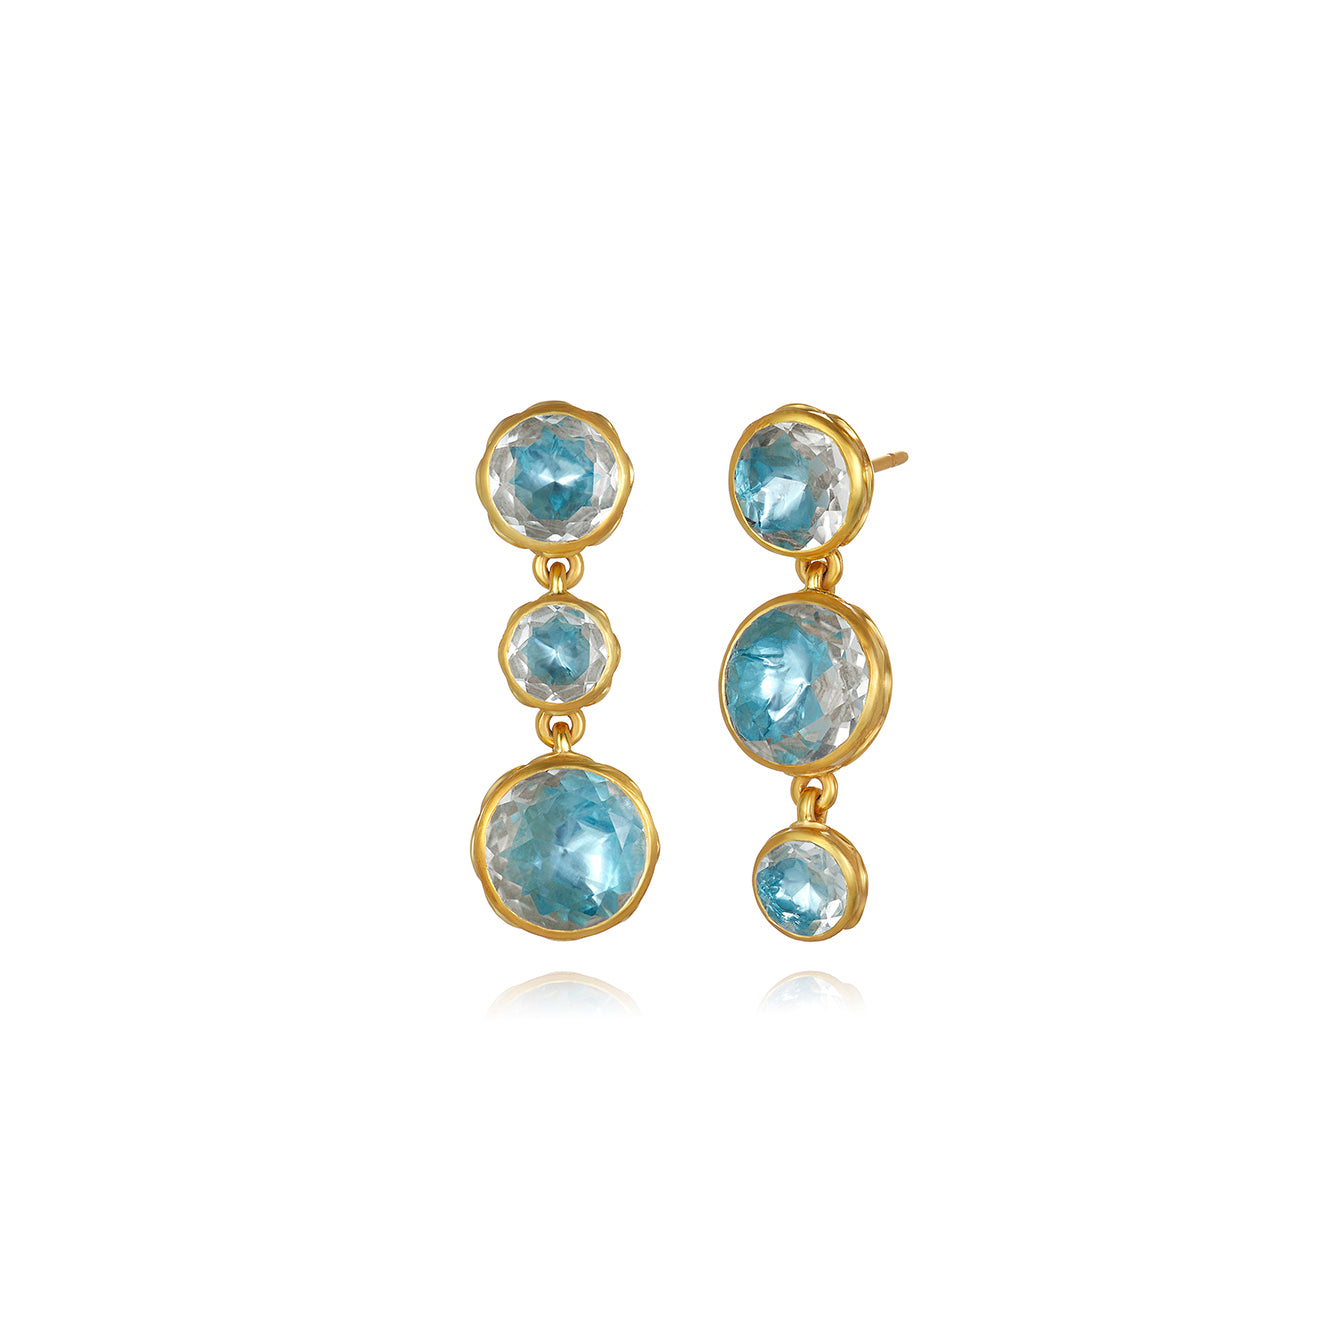 Catherine Round 3-Drop Earrings (Black Rhodium or Yellow Gold Wash)